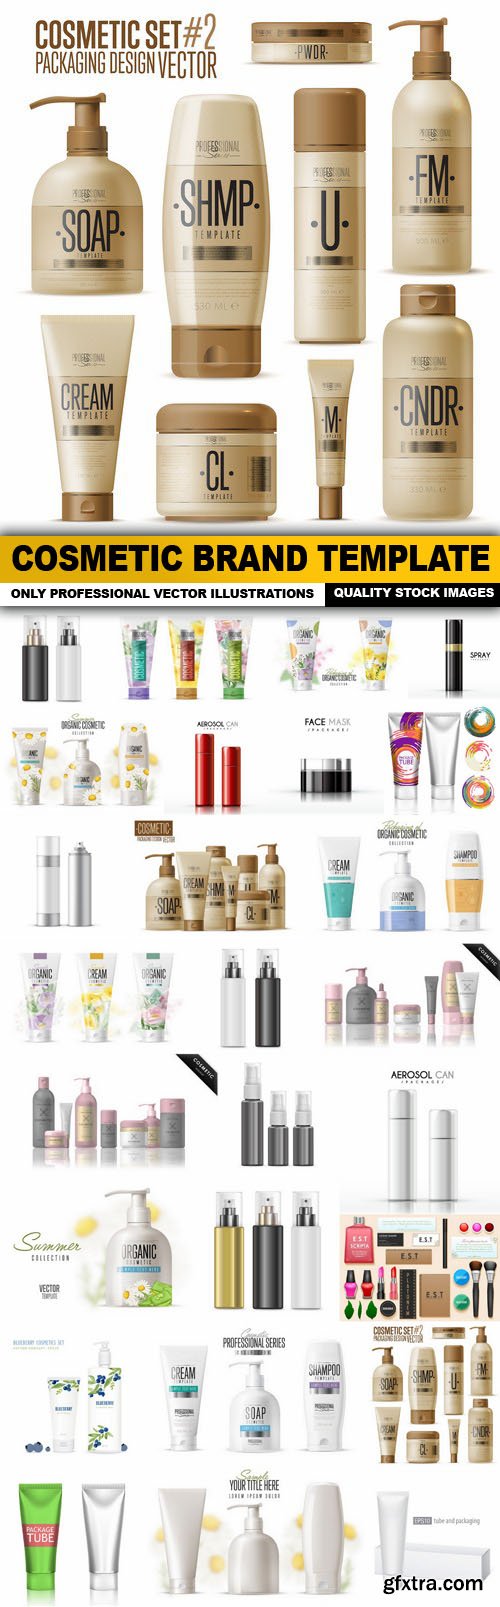 Cosmetic Brand Template - 26 Vector